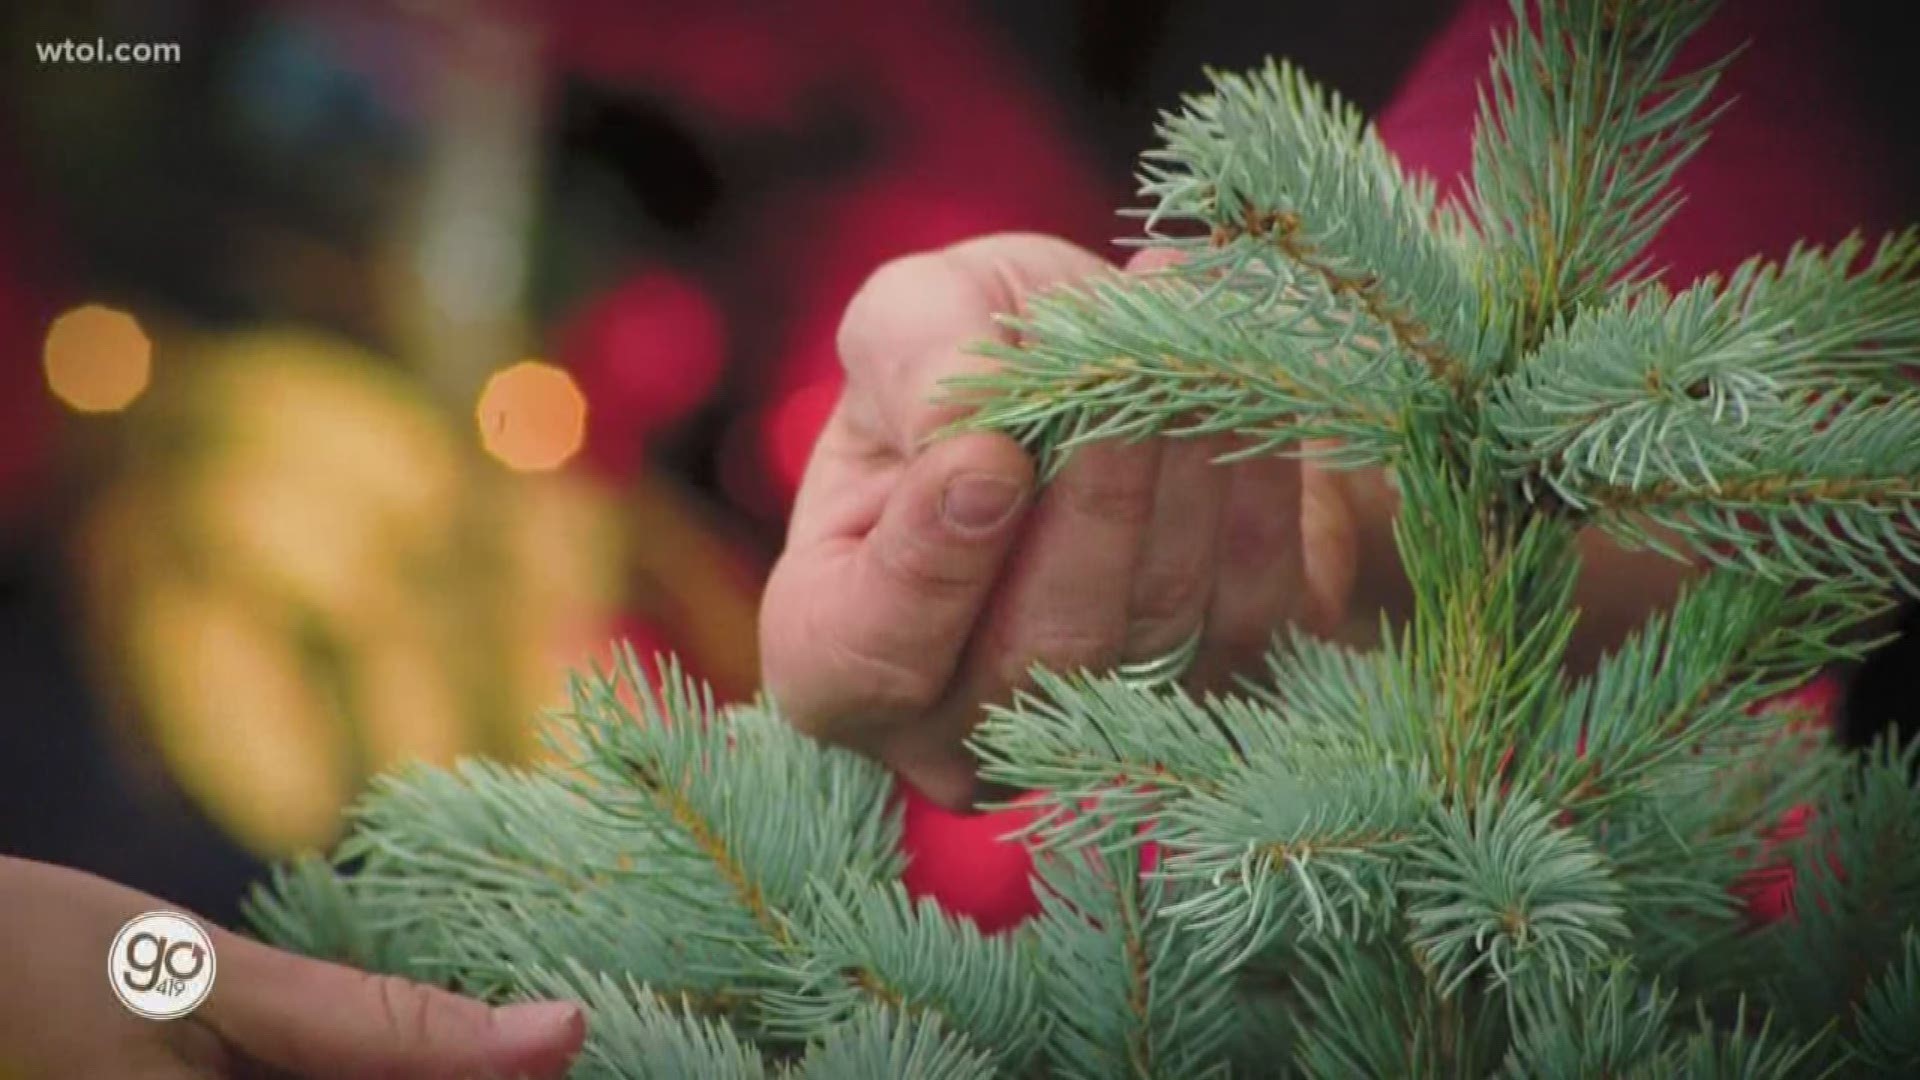 Jenny Amstutz with Nature's Corner explains how using a potted evergreen is different than decorating your home with a cut evergreen this season.